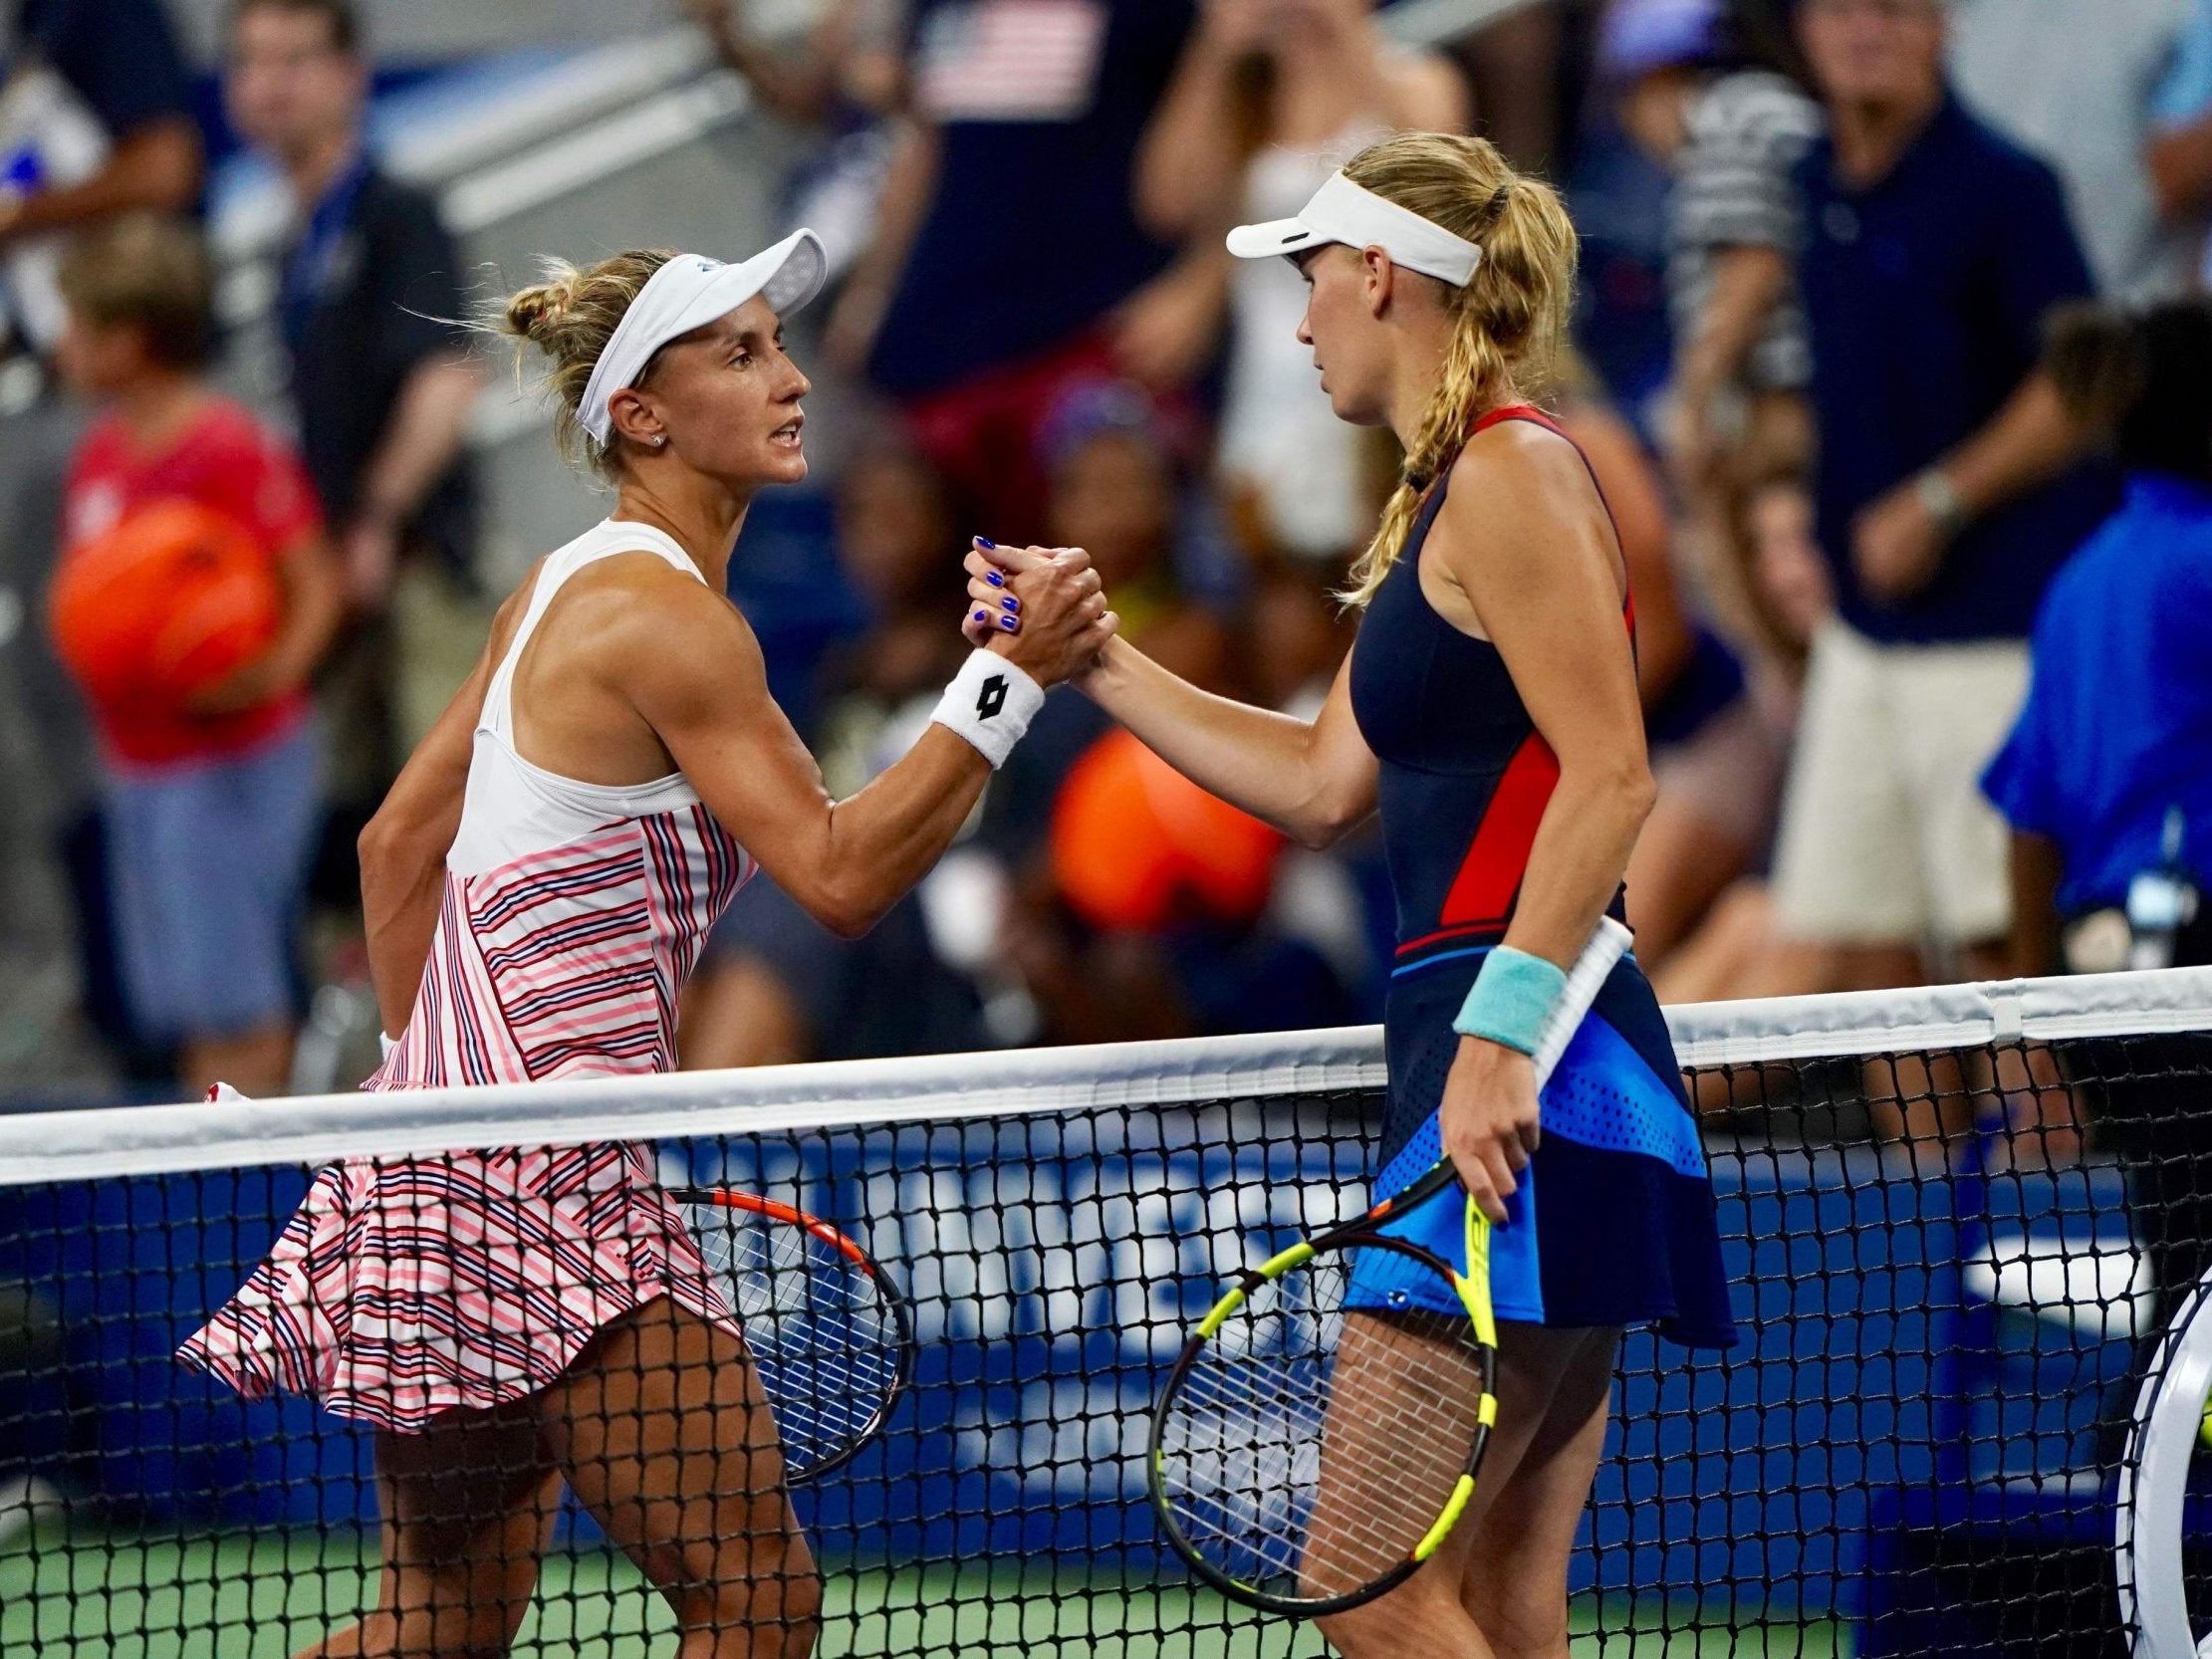 Wozniacki has not looked like the same player who won in Melbourne earlier this year